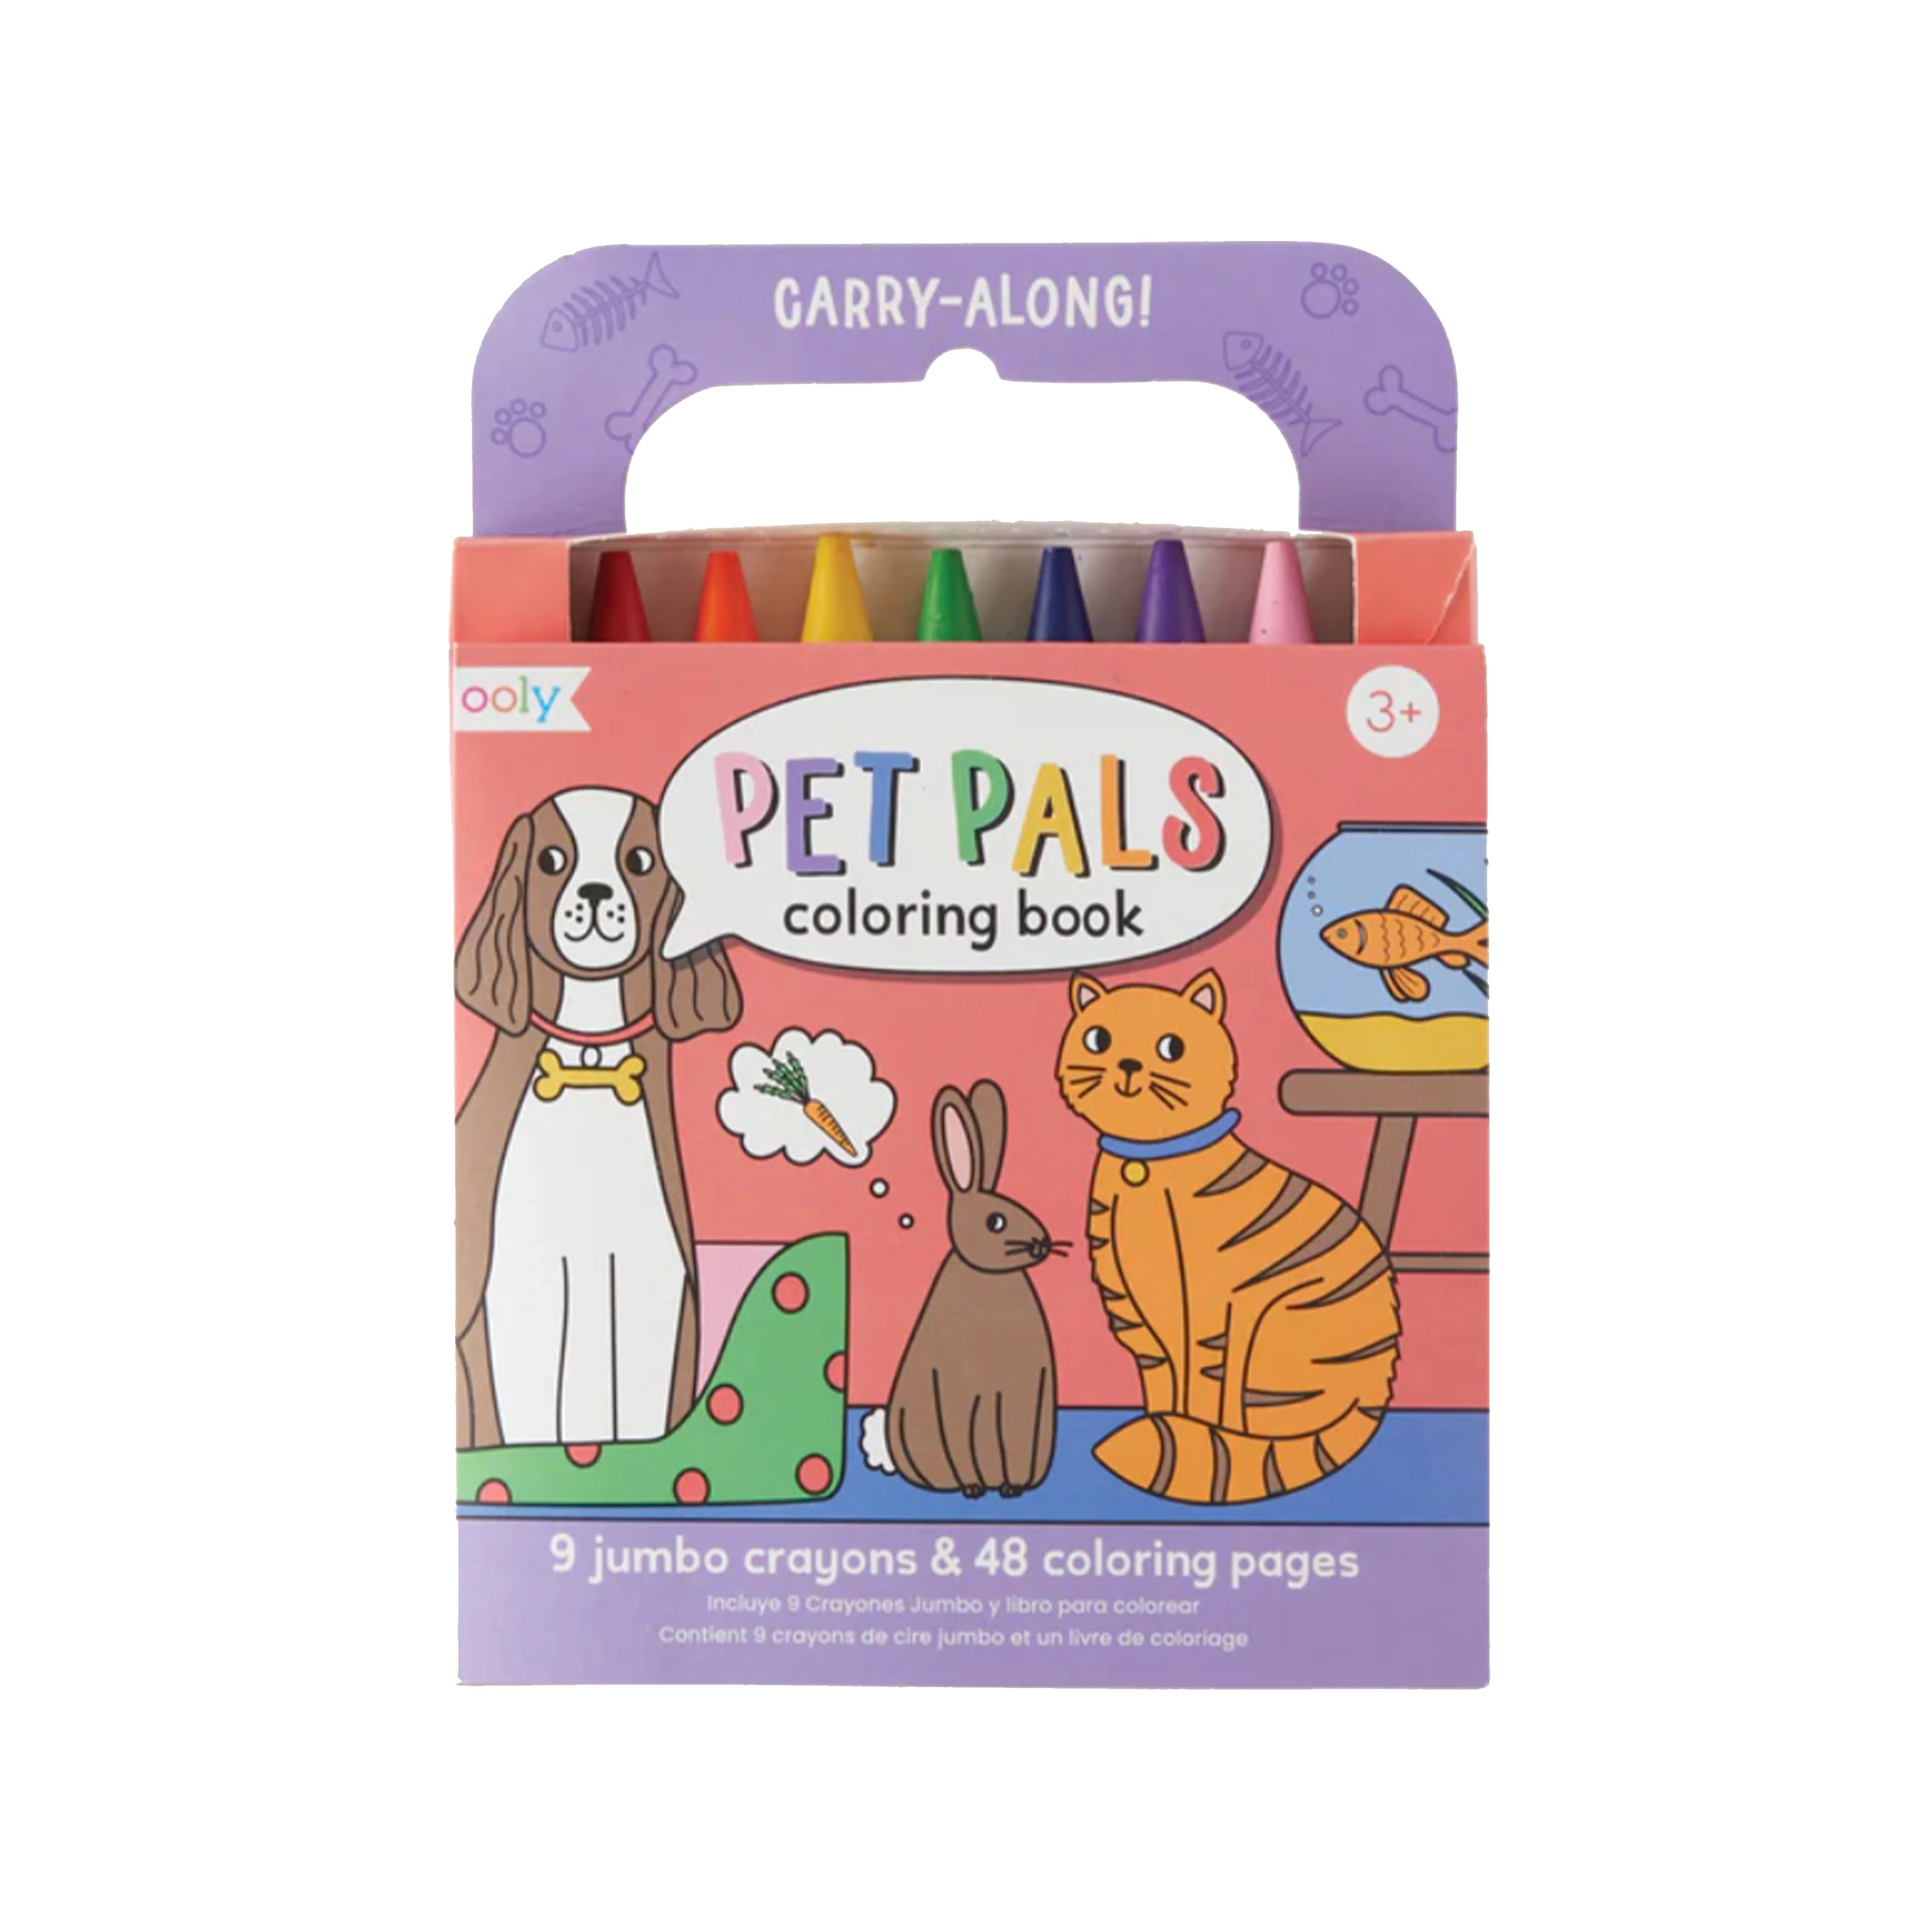 Pet Pals Carry Along Coloring Book - Ooly | The Beaufort Bonnet Company